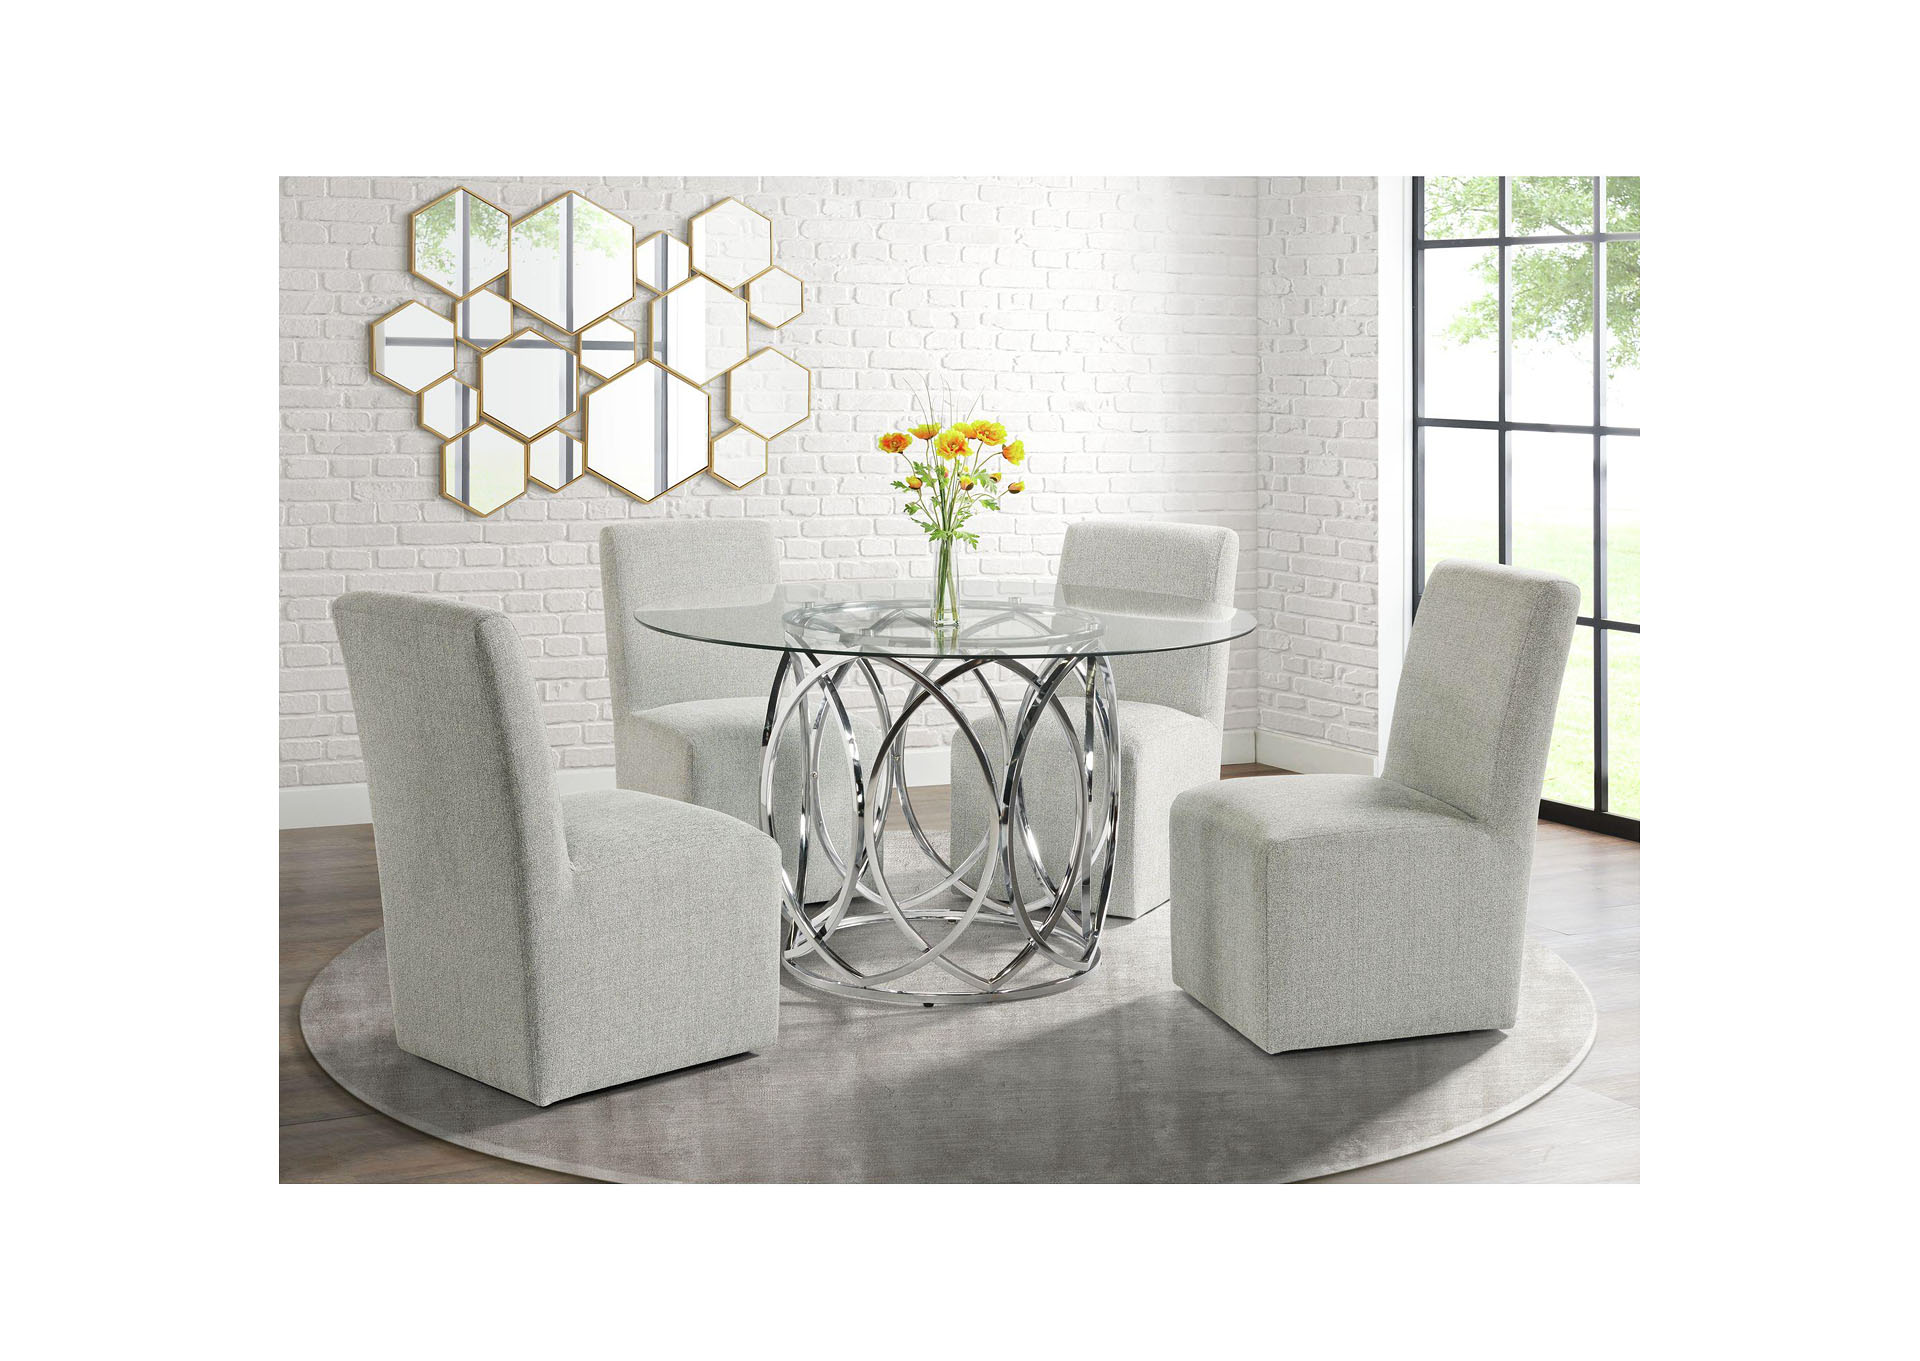 Merlin Dining Table,Elements